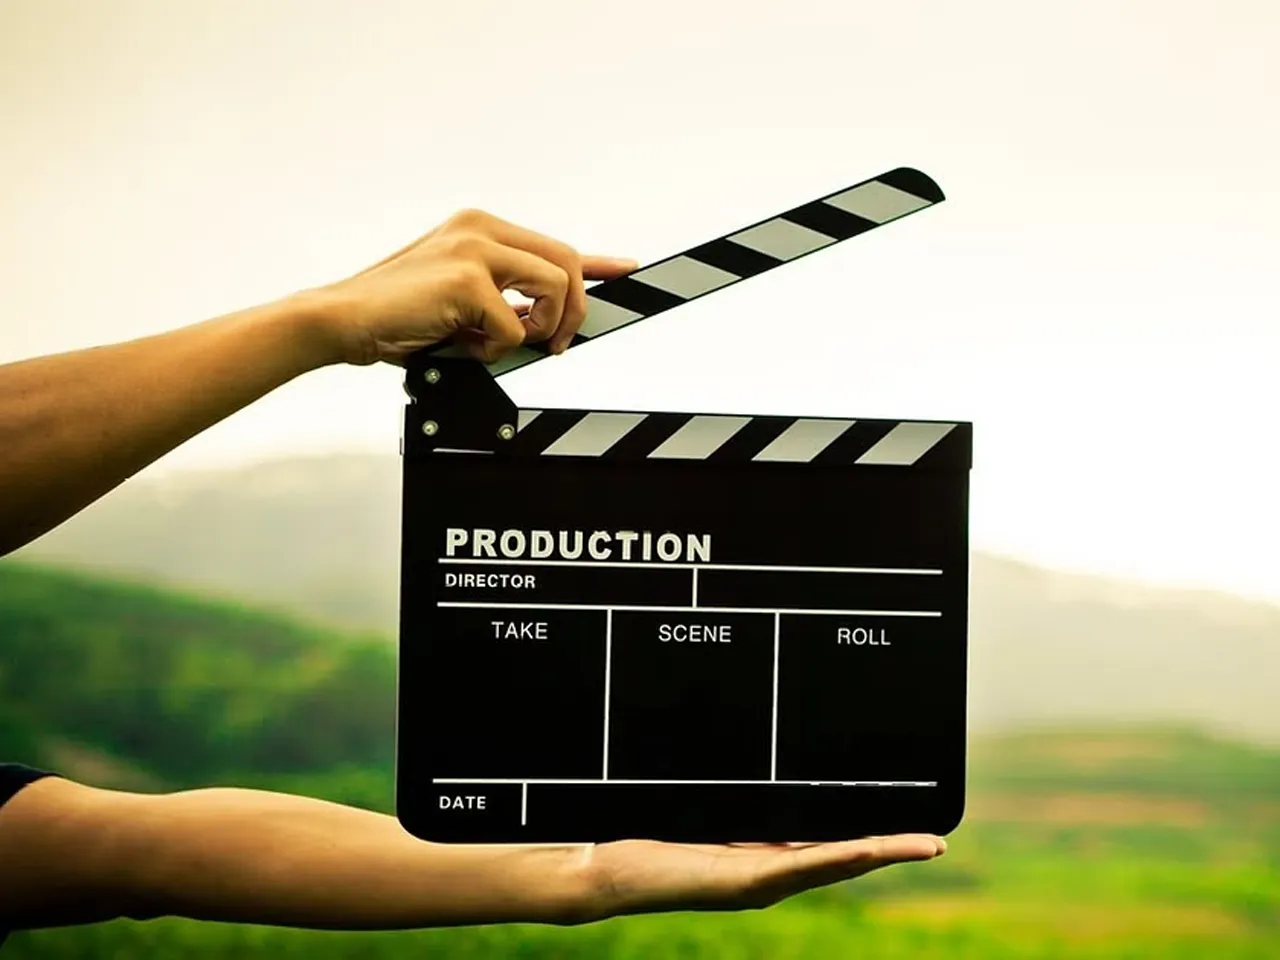 ad film shoots on government land 